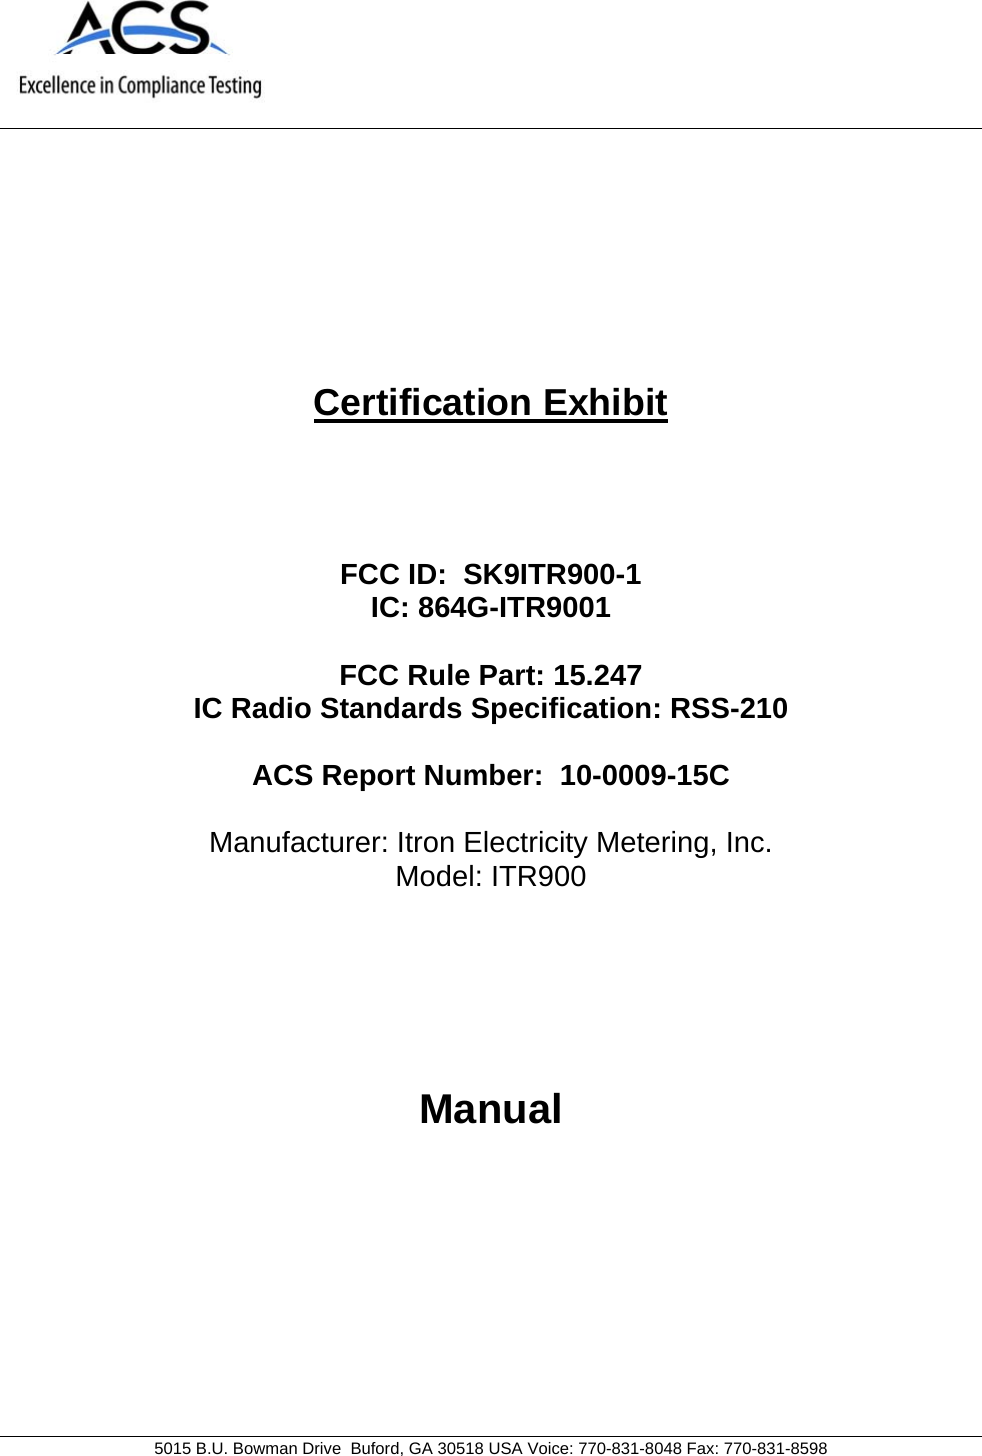     5015 B.U. Bowman Drive  Buford, GA 30518 USA Voice: 770-831-8048 Fax: 770-831-8598   Certification Exhibit     FCC ID:  SK9ITR900-1  IC: 864G-ITR9001  FCC Rule Part: 15.247 IC Radio Standards Specification: RSS-210  ACS Report Number:  10-0009-15C   Manufacturer: Itron Electricity Metering, Inc. Model: ITR900     Manual   